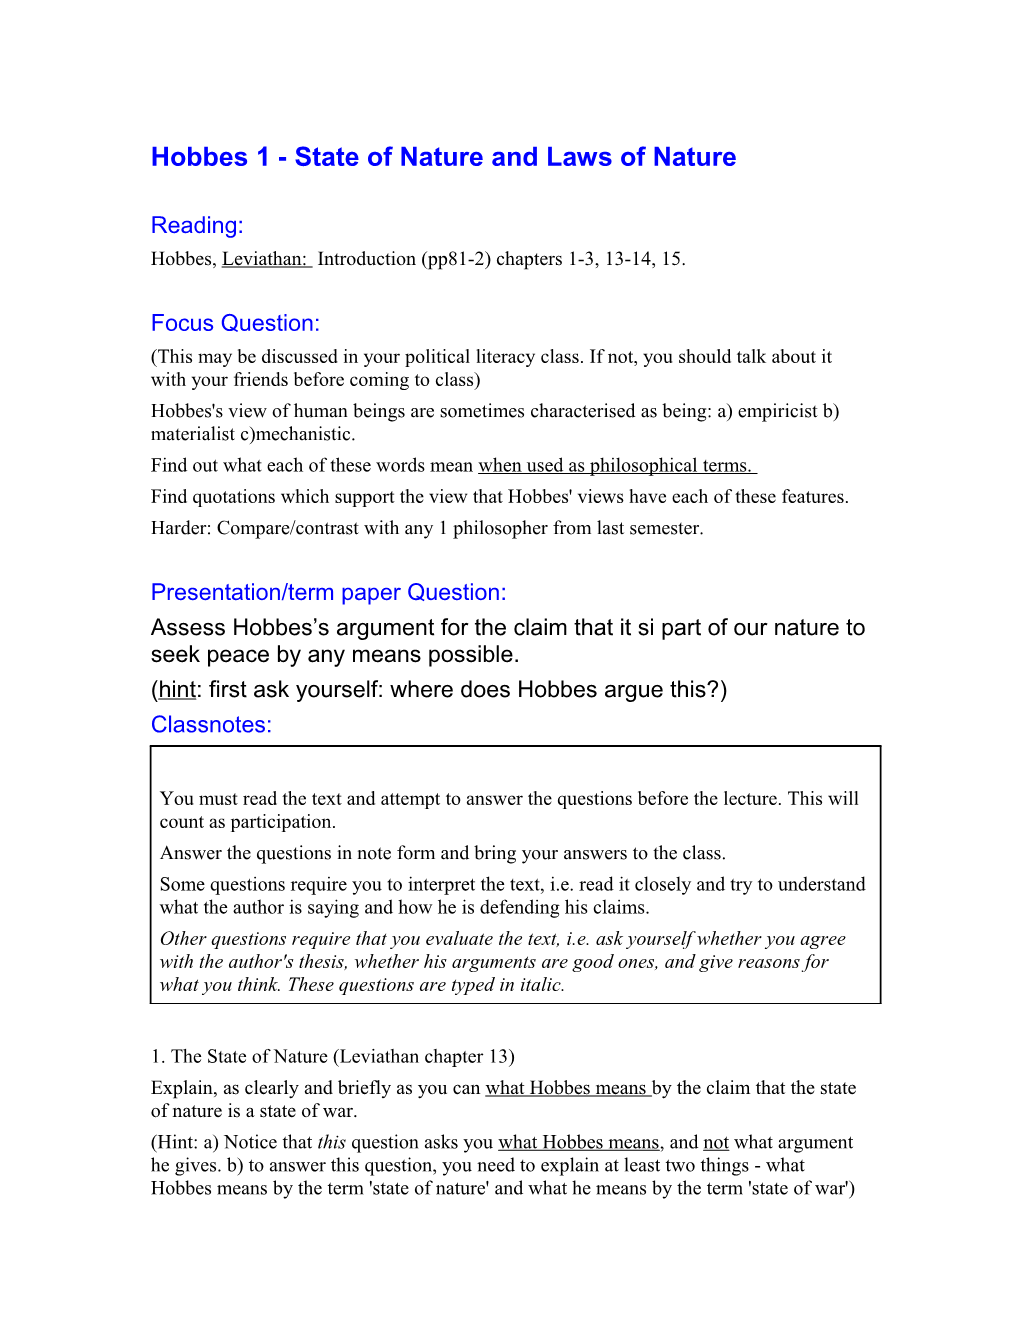 Hobbes 1 - State of Nature and Laws of Nature